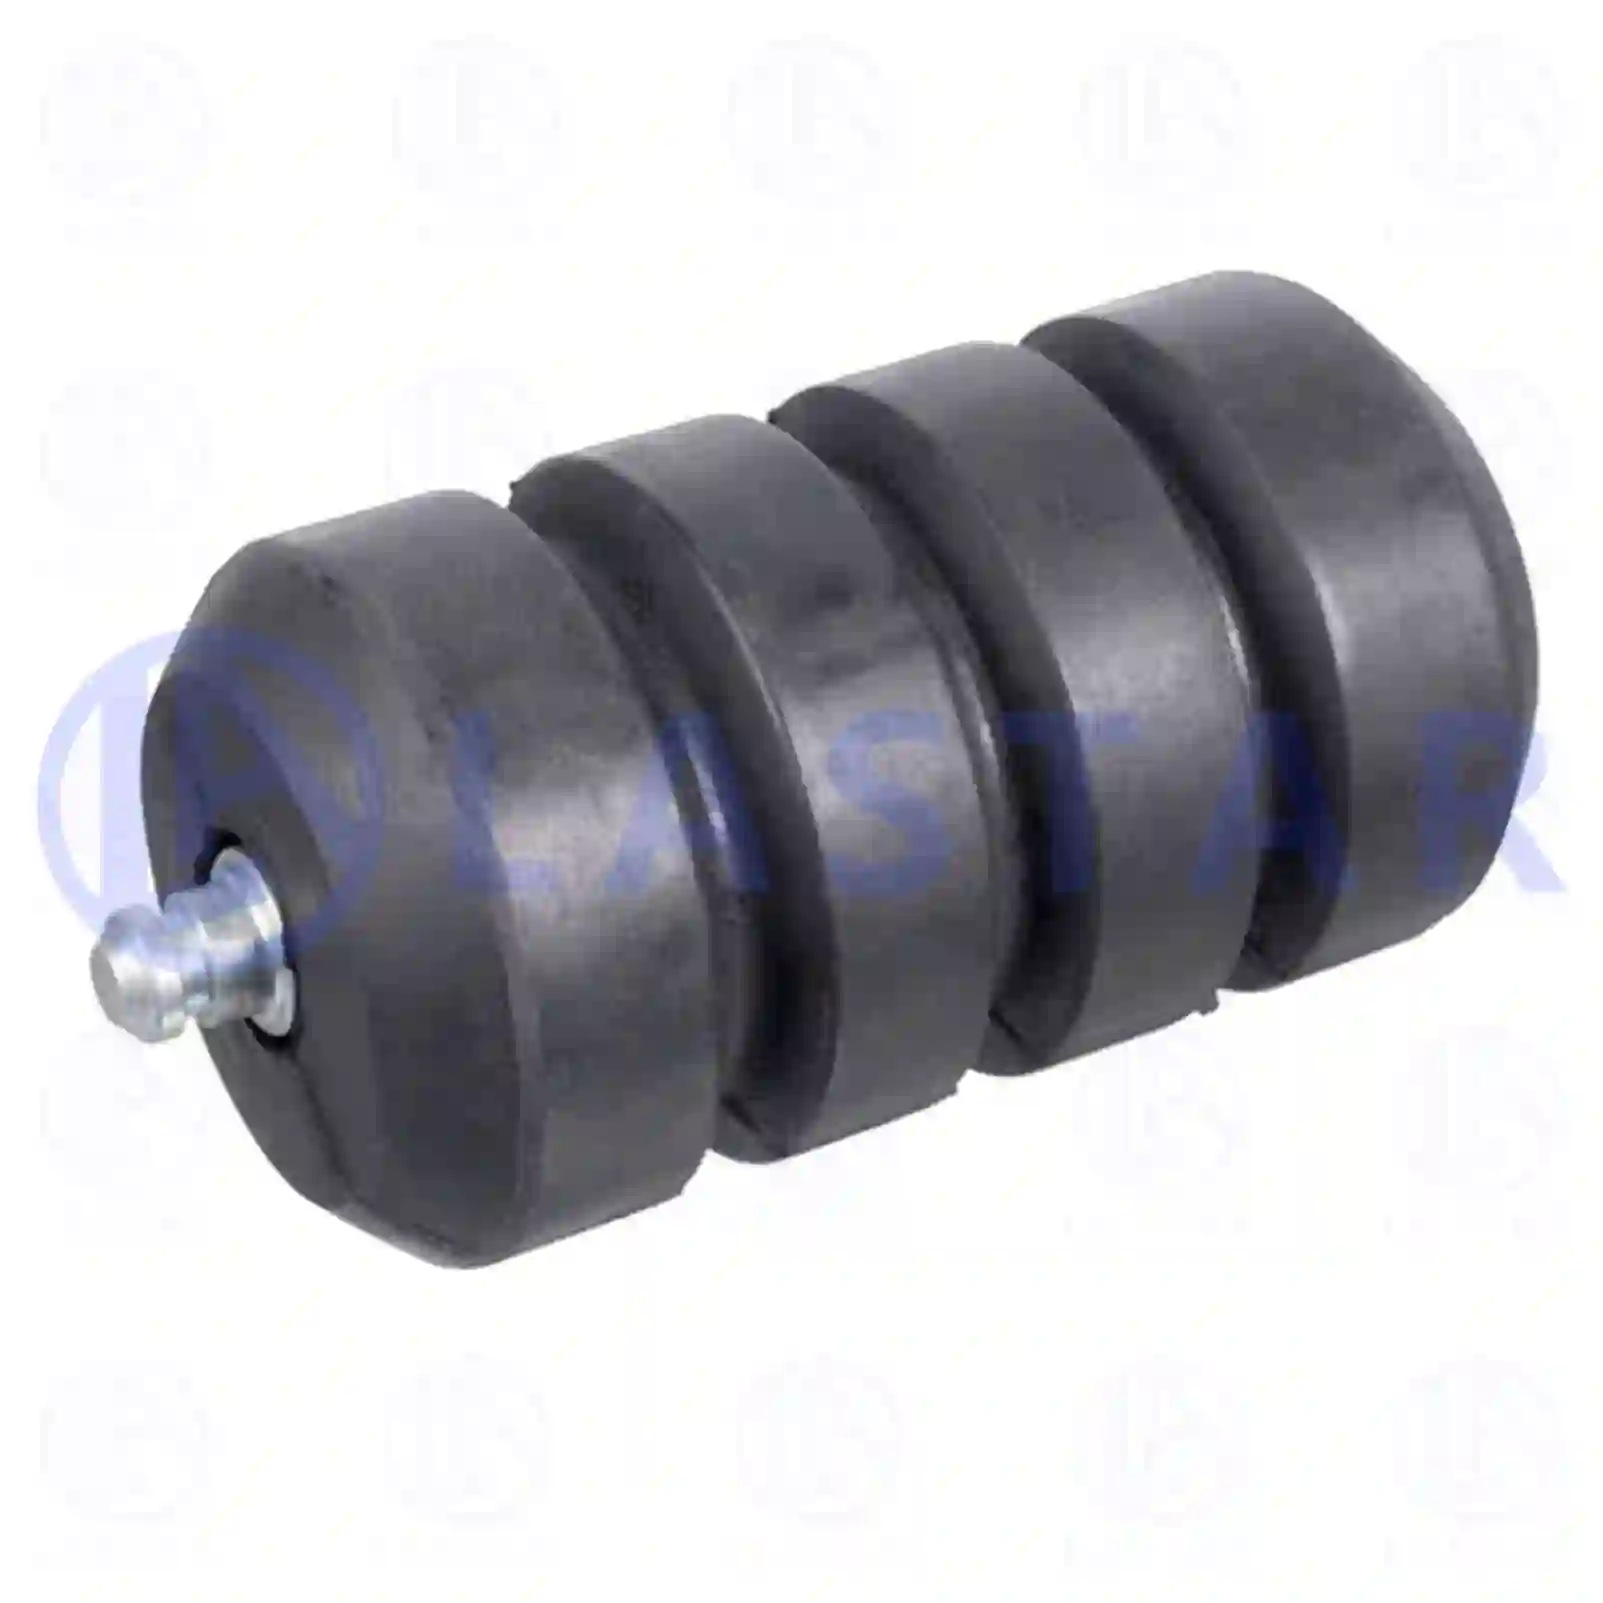 Rubber bushing, 77728068, 3093200177, , , ||  77728068 Lastar Spare Part | Truck Spare Parts, Auotomotive Spare Parts Rubber bushing, 77728068, 3093200177, , , ||  77728068 Lastar Spare Part | Truck Spare Parts, Auotomotive Spare Parts